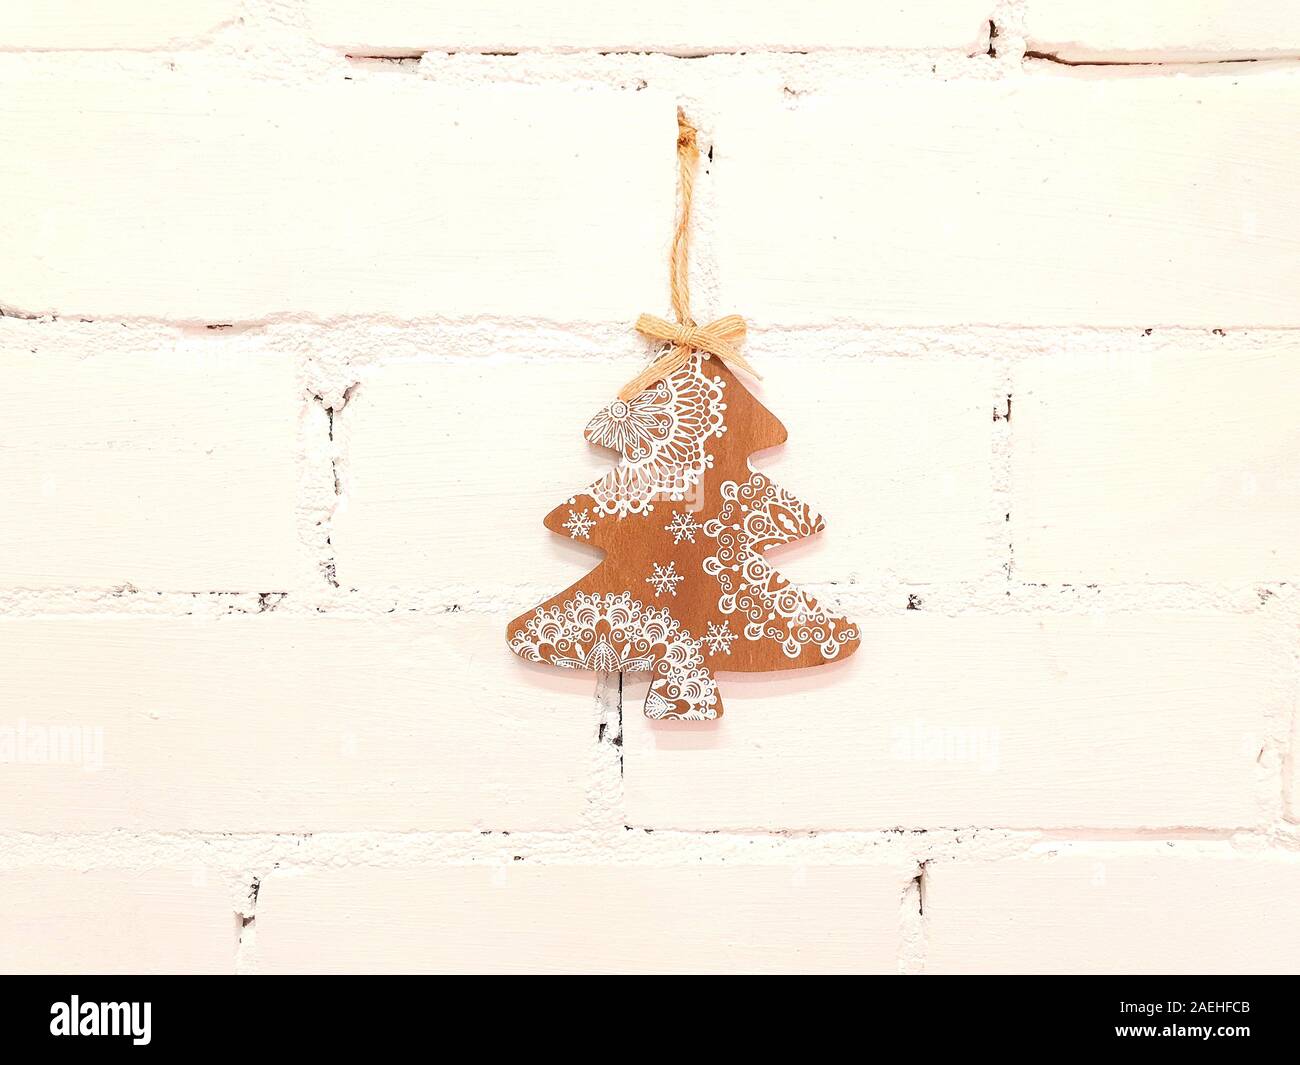 Christmas, small wooden tree. The decorations are attached to the wall in white and serve as decoration in the interior of the house. Stock Photo